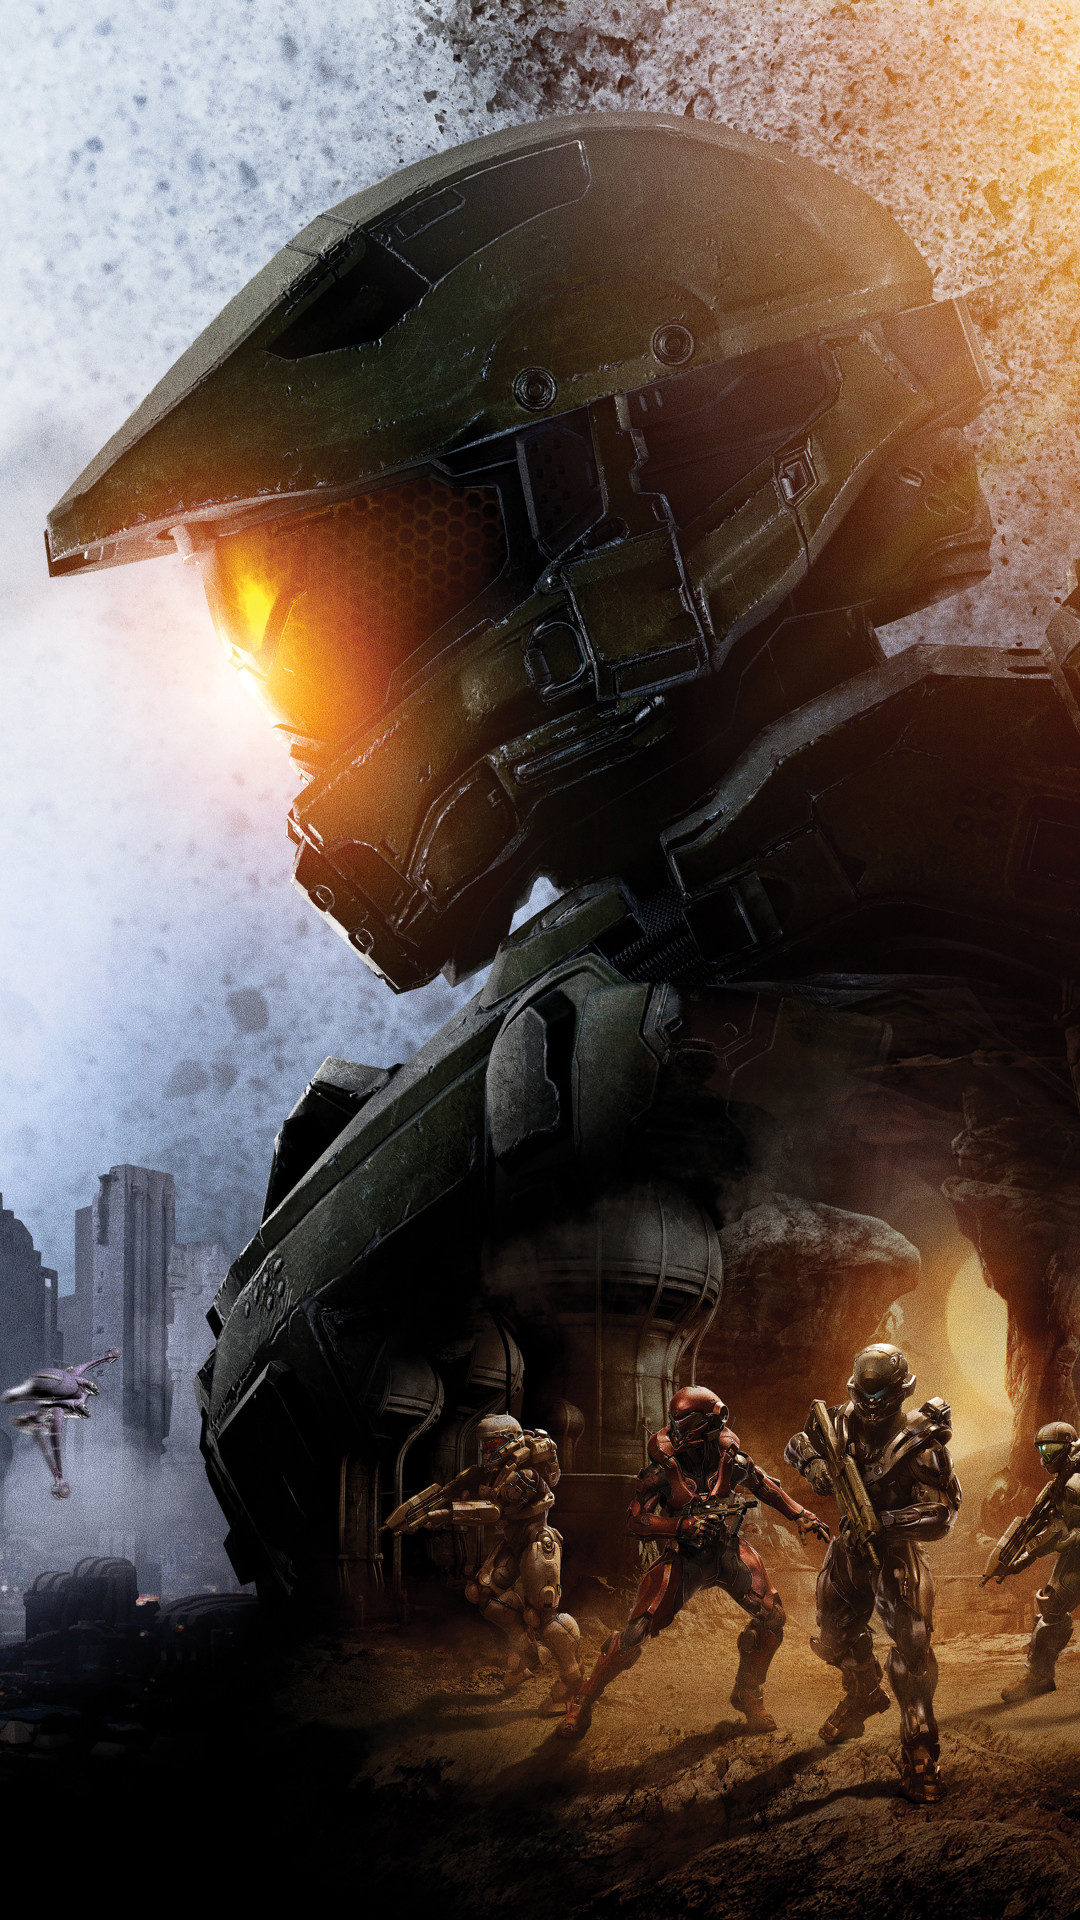 halo iphone wallpaper,action adventure game,pc game,explosion,shooter game,strategy video game